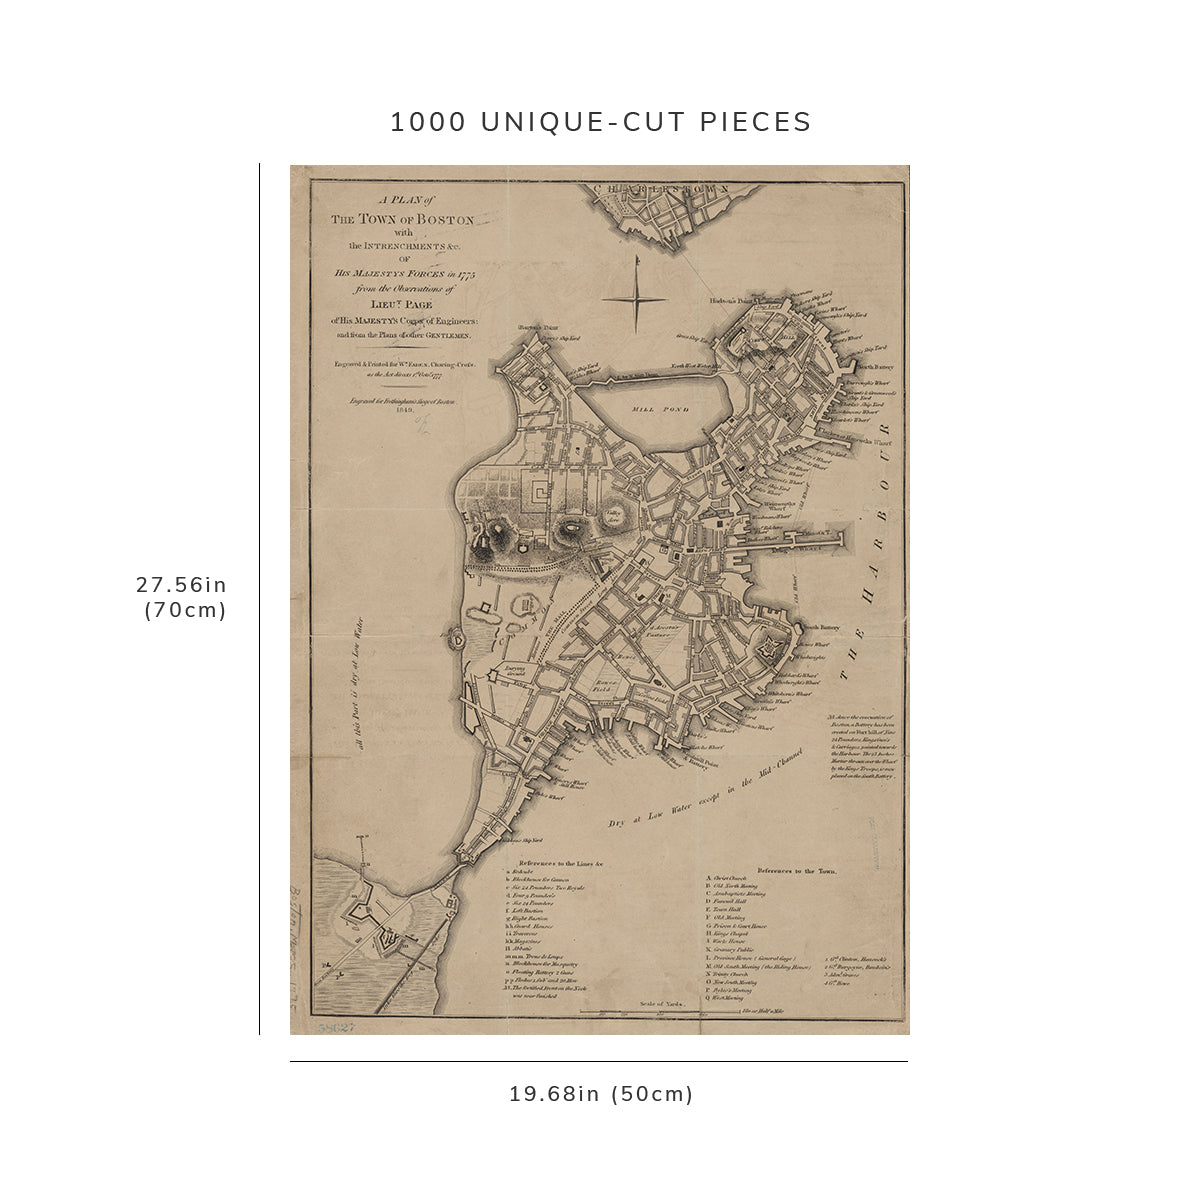 1000 Piece Jigsaw Puzzle: 1849 Map of Boston A plan of the town of Boston Page, Thomas H